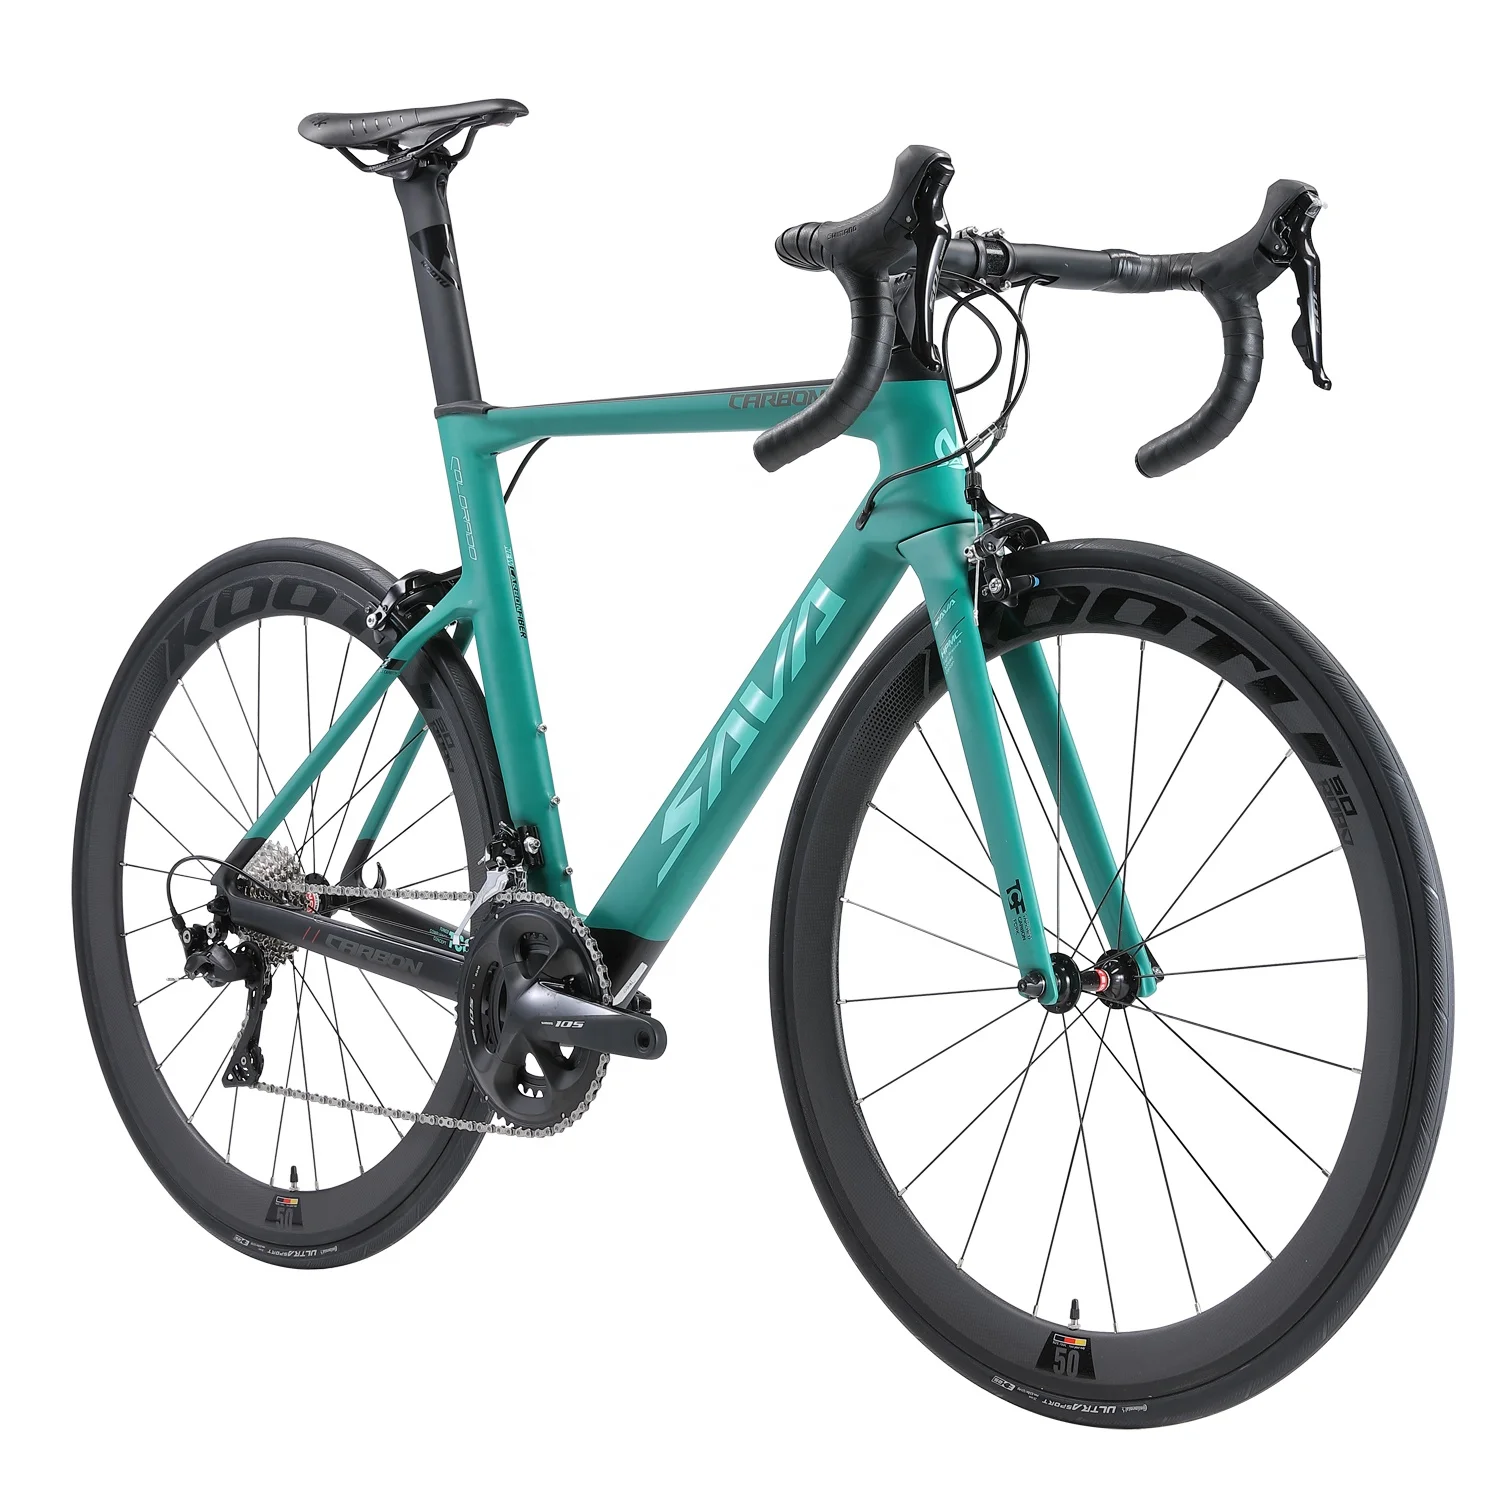 

SAVA bike factory new high quality 700C 22 speed carbon fiber road bike with shimano groupset